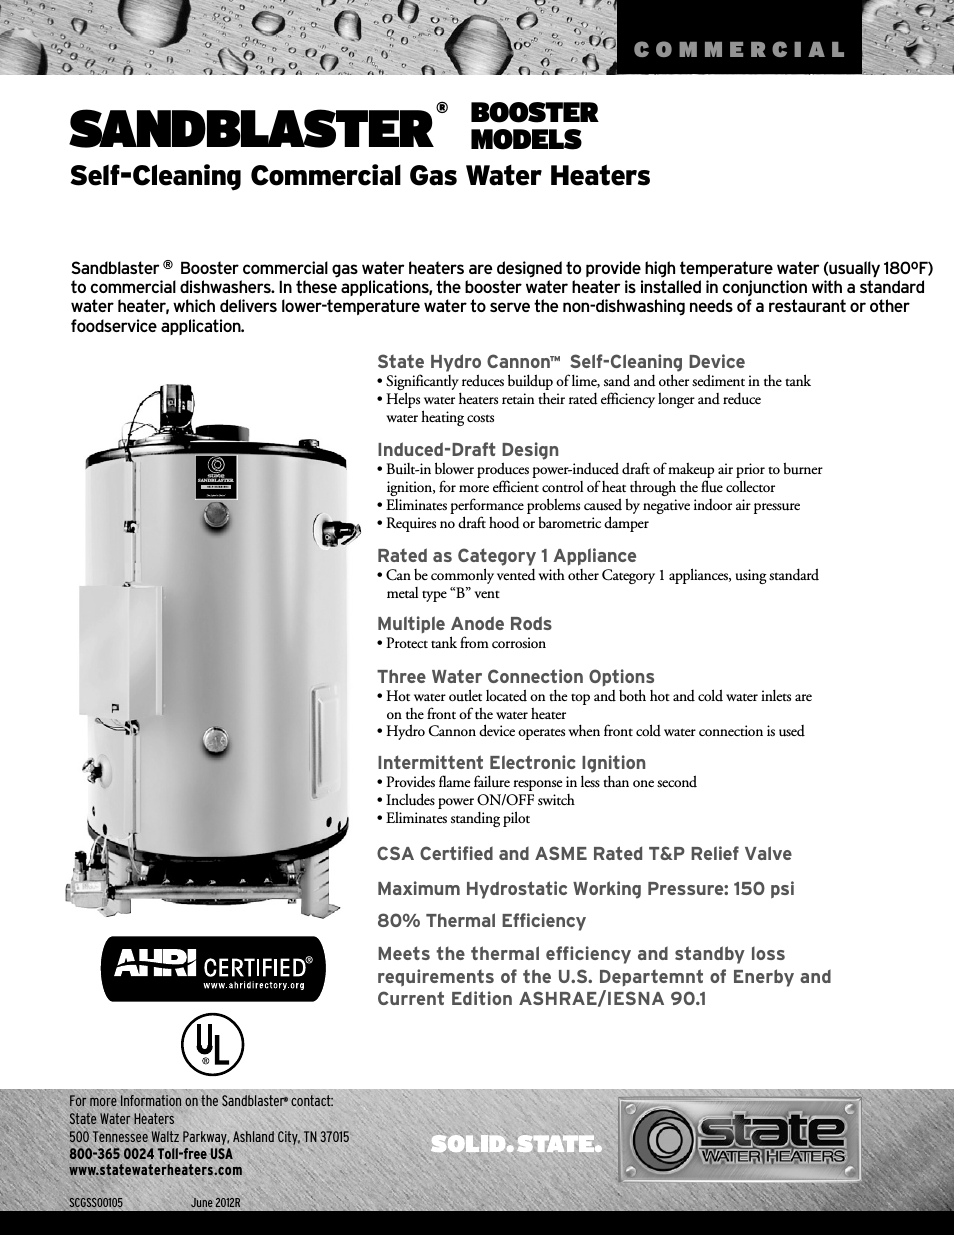 SANDBLASTER Self-Cleaning Commercial Gas Water Heaters